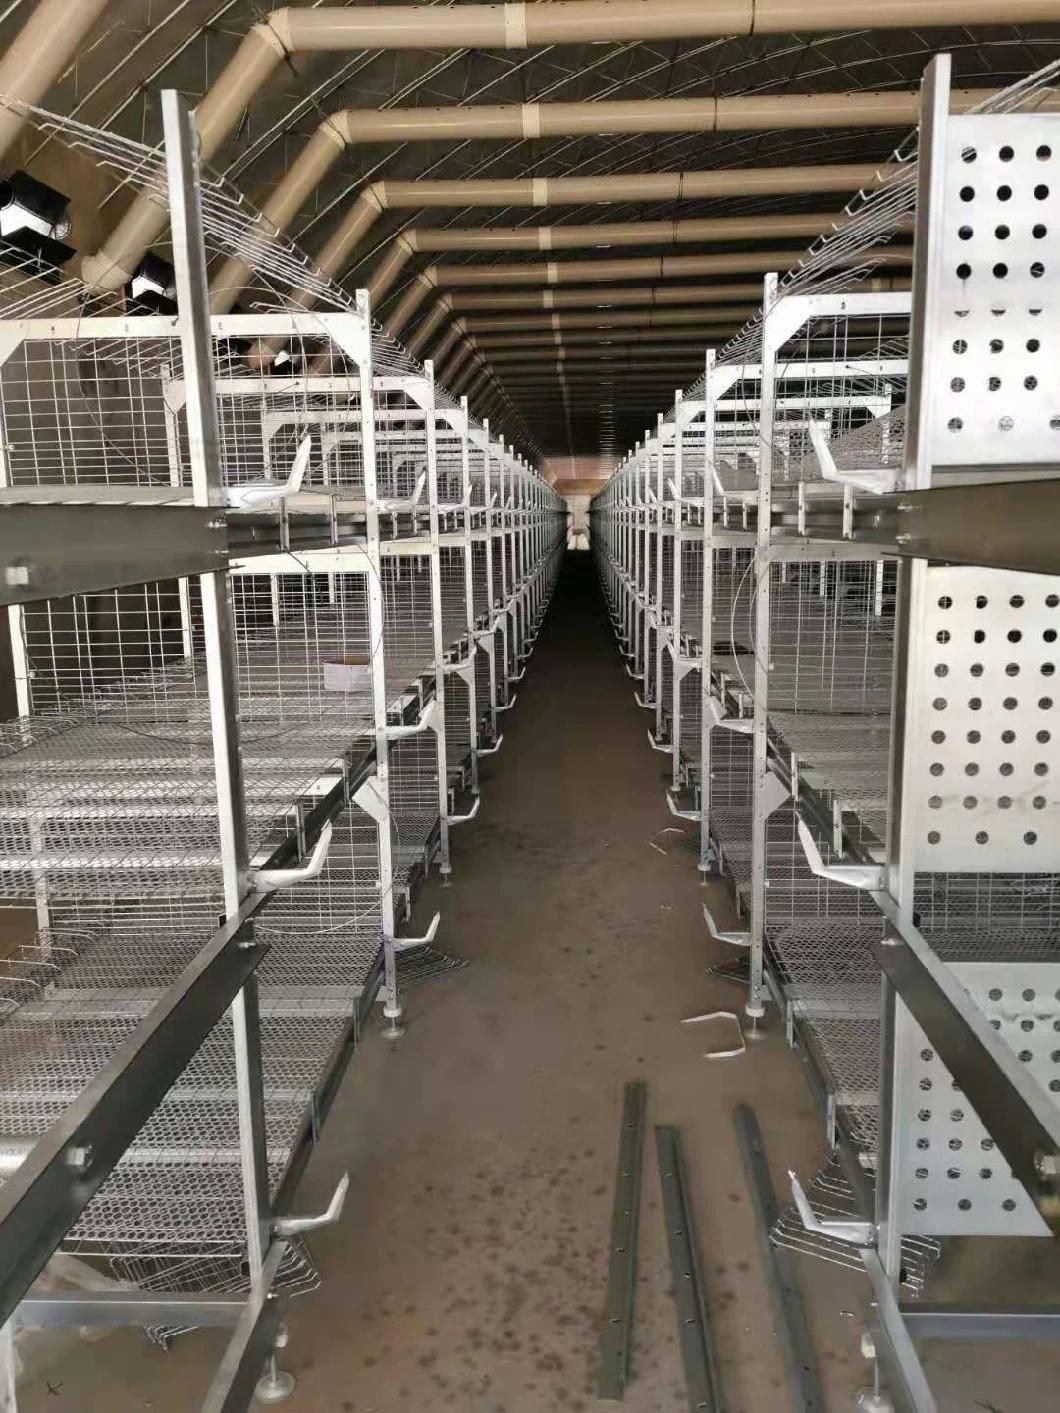 4 Tires Cage for Poultry Cage